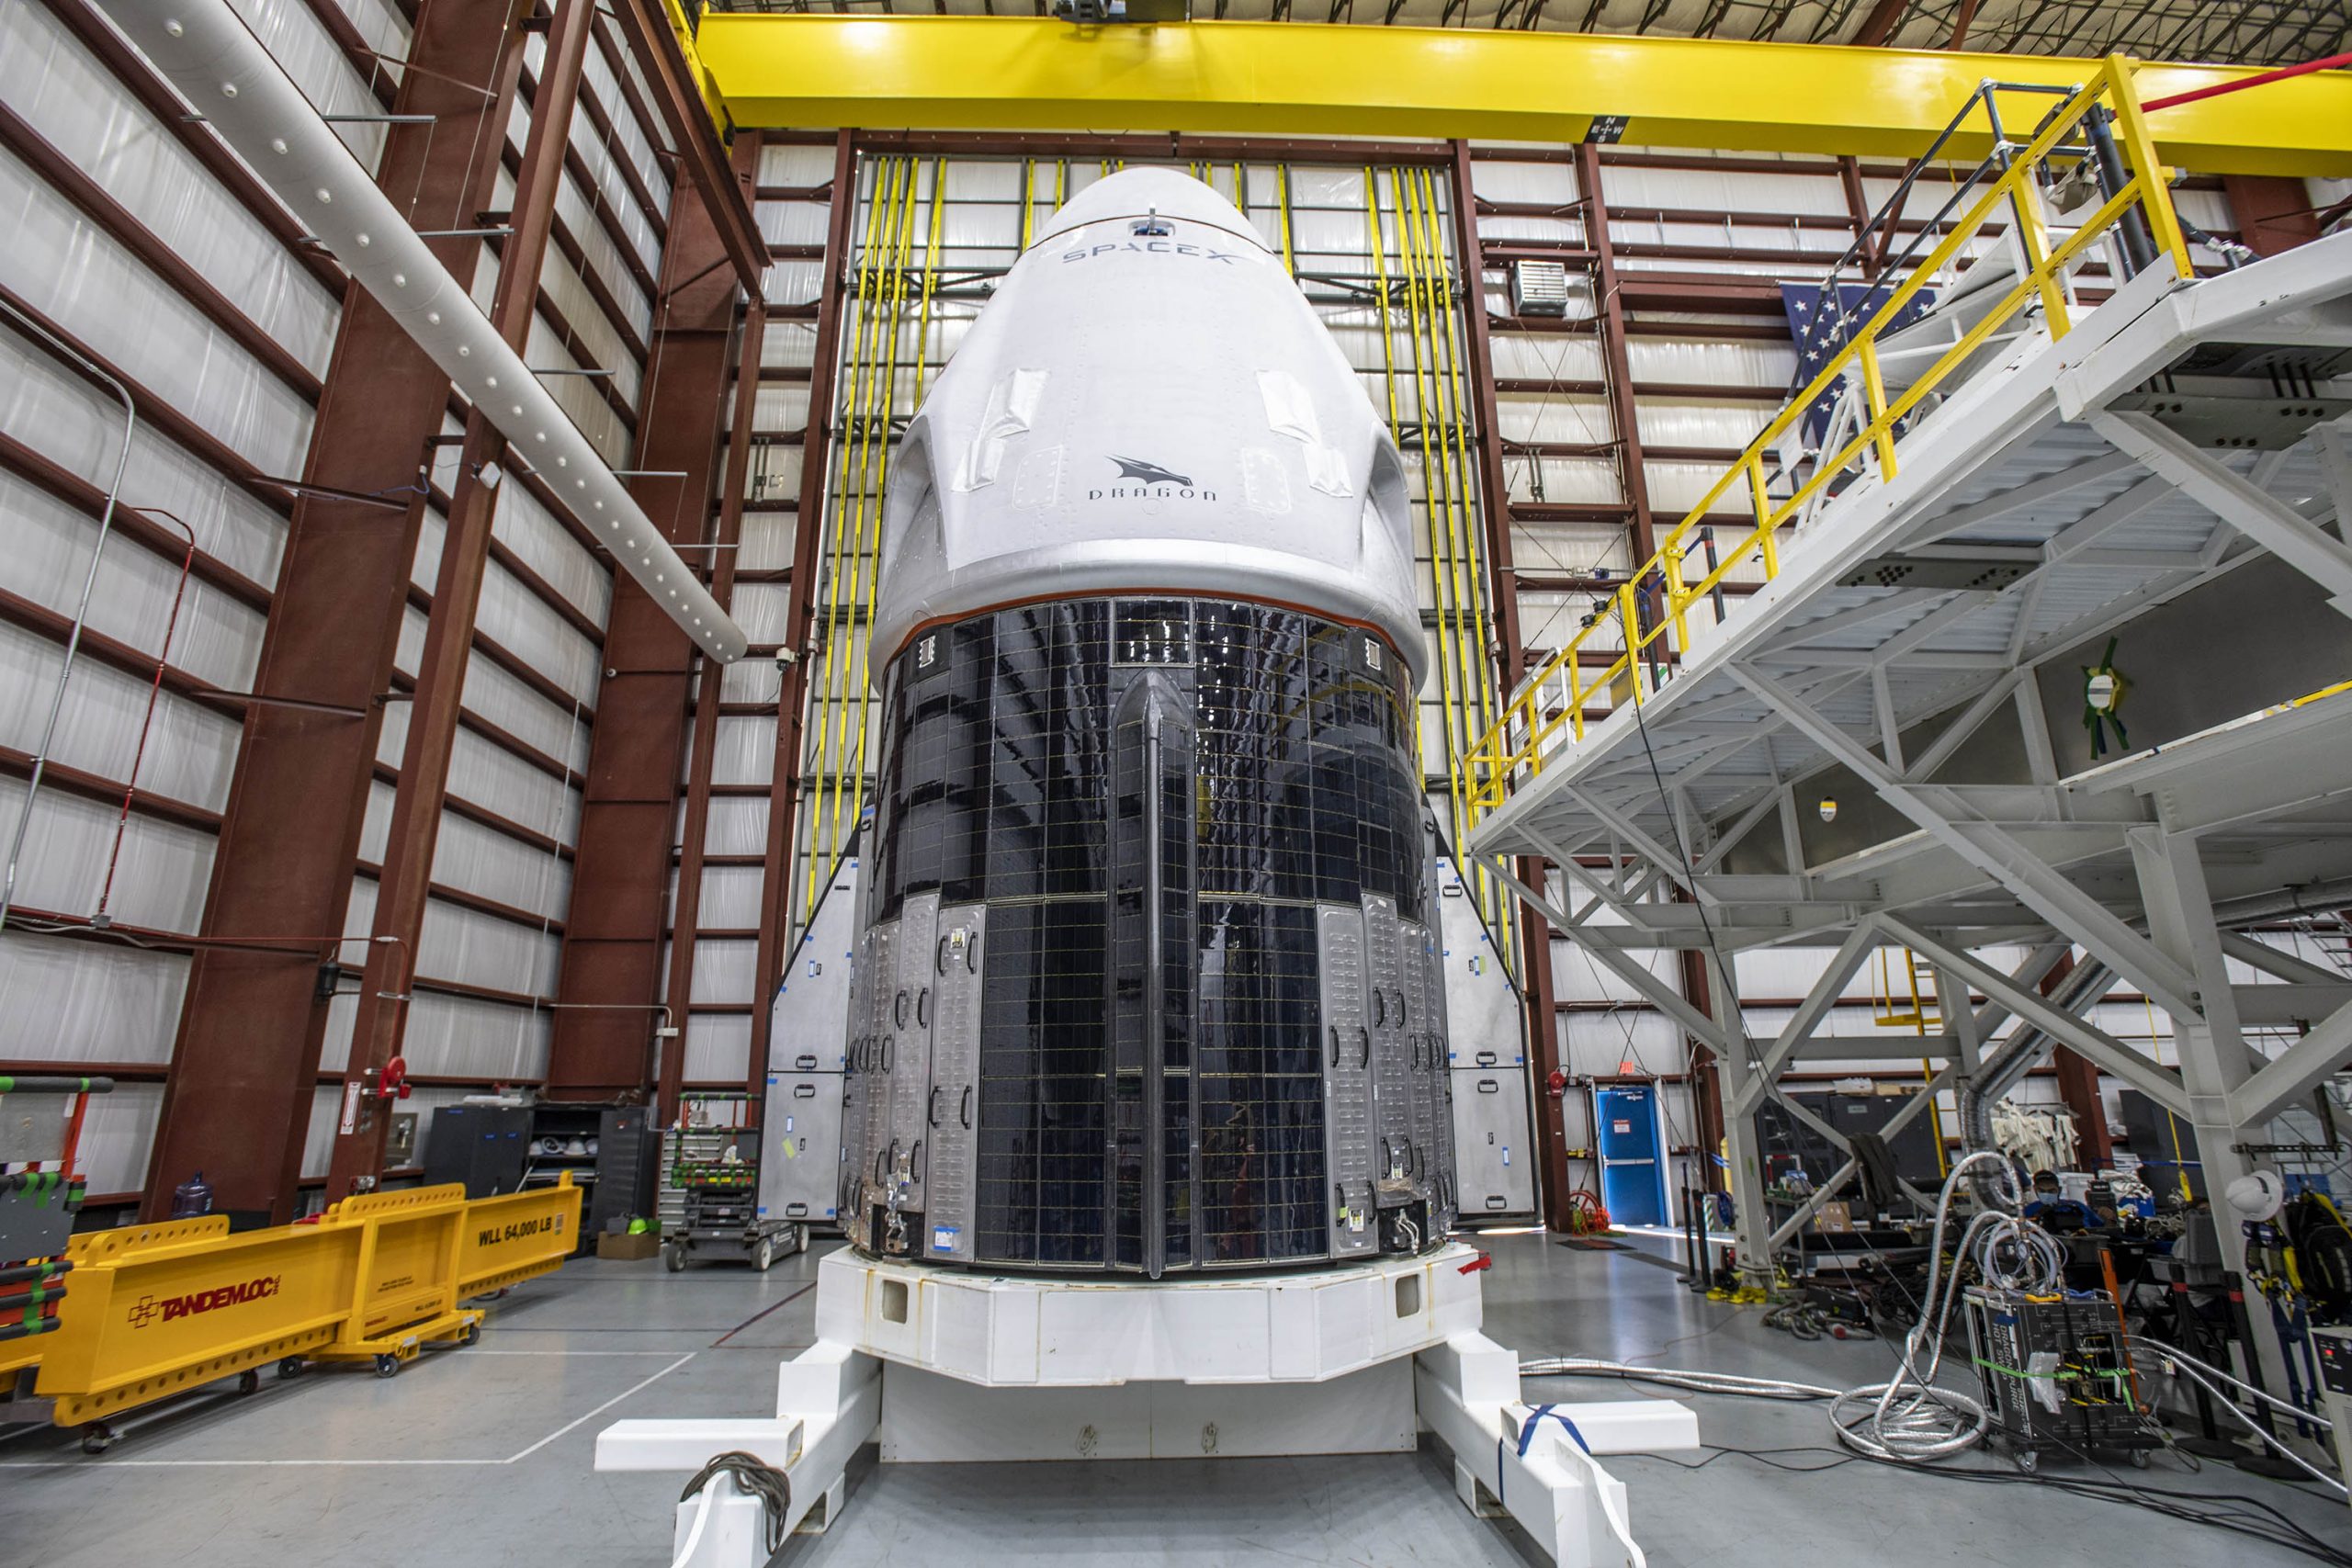 SpaceX's Crew-1 Crew Dragon spacecraft will launch the first operational commercial crew flight for NASA on Nov. 14, 2020.